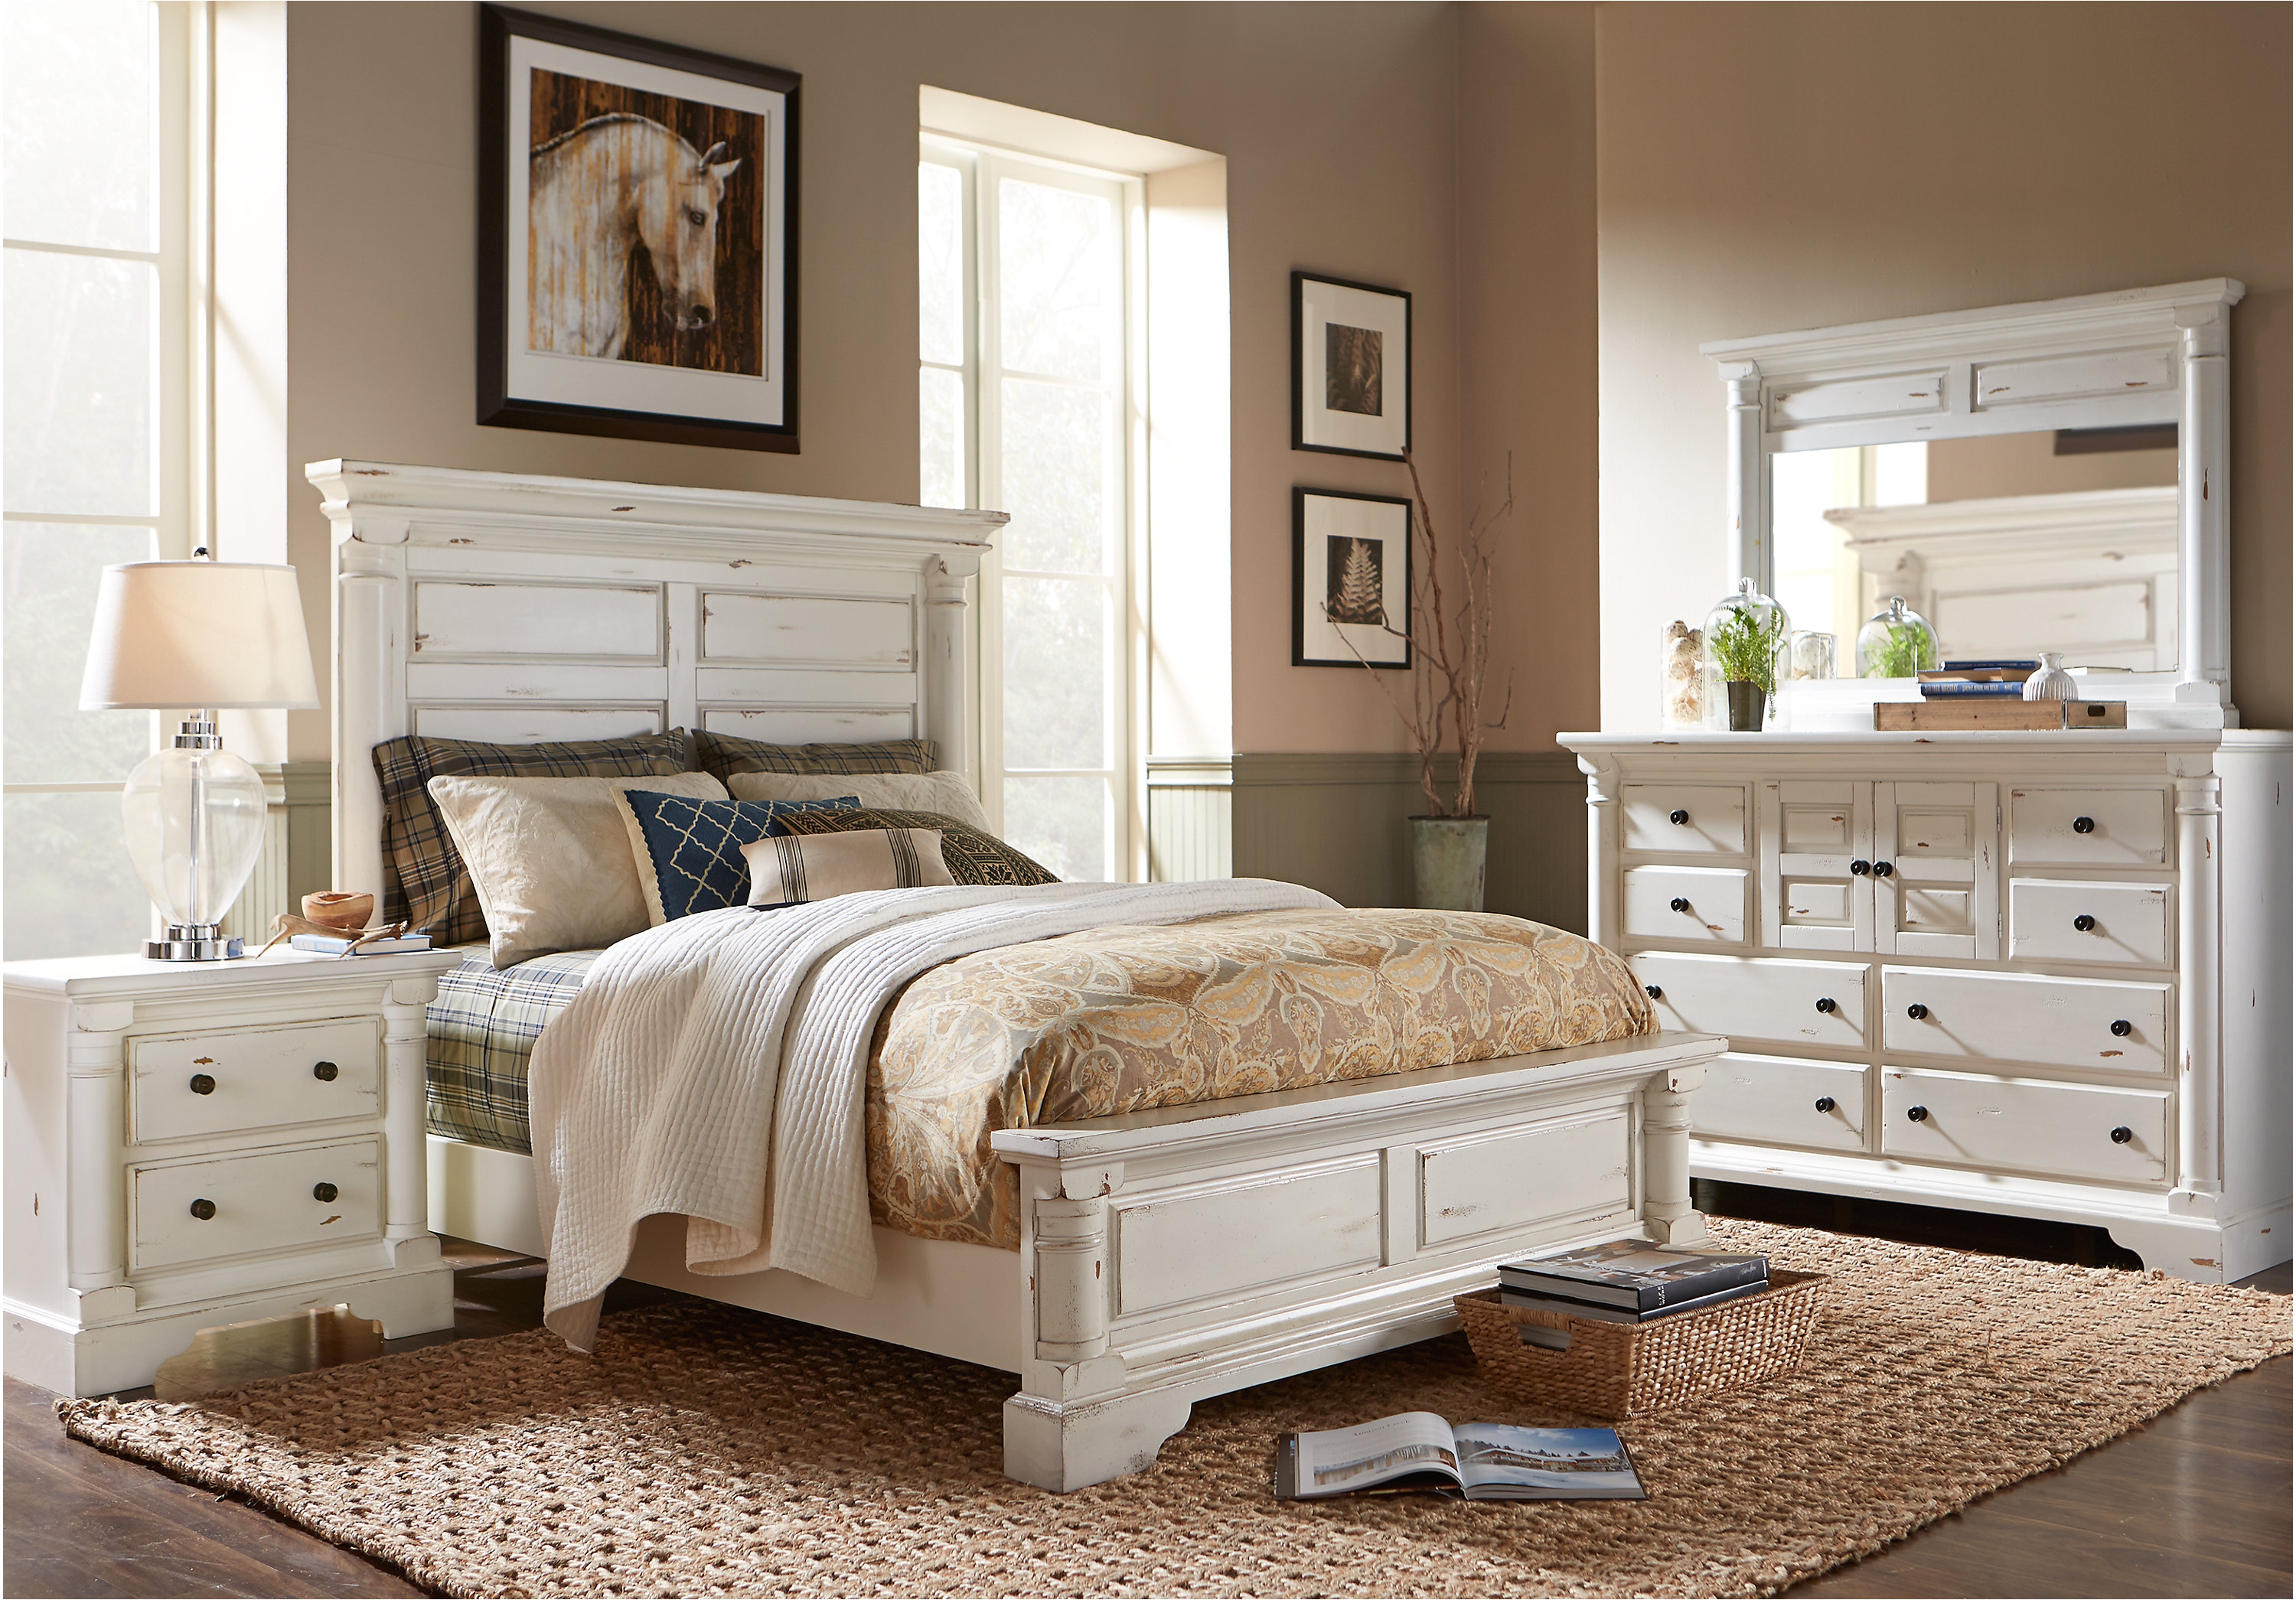 Astounding White Twin Bedroom Sets With Bedroom Furniture Furniture Mattresses Glass Mission Style